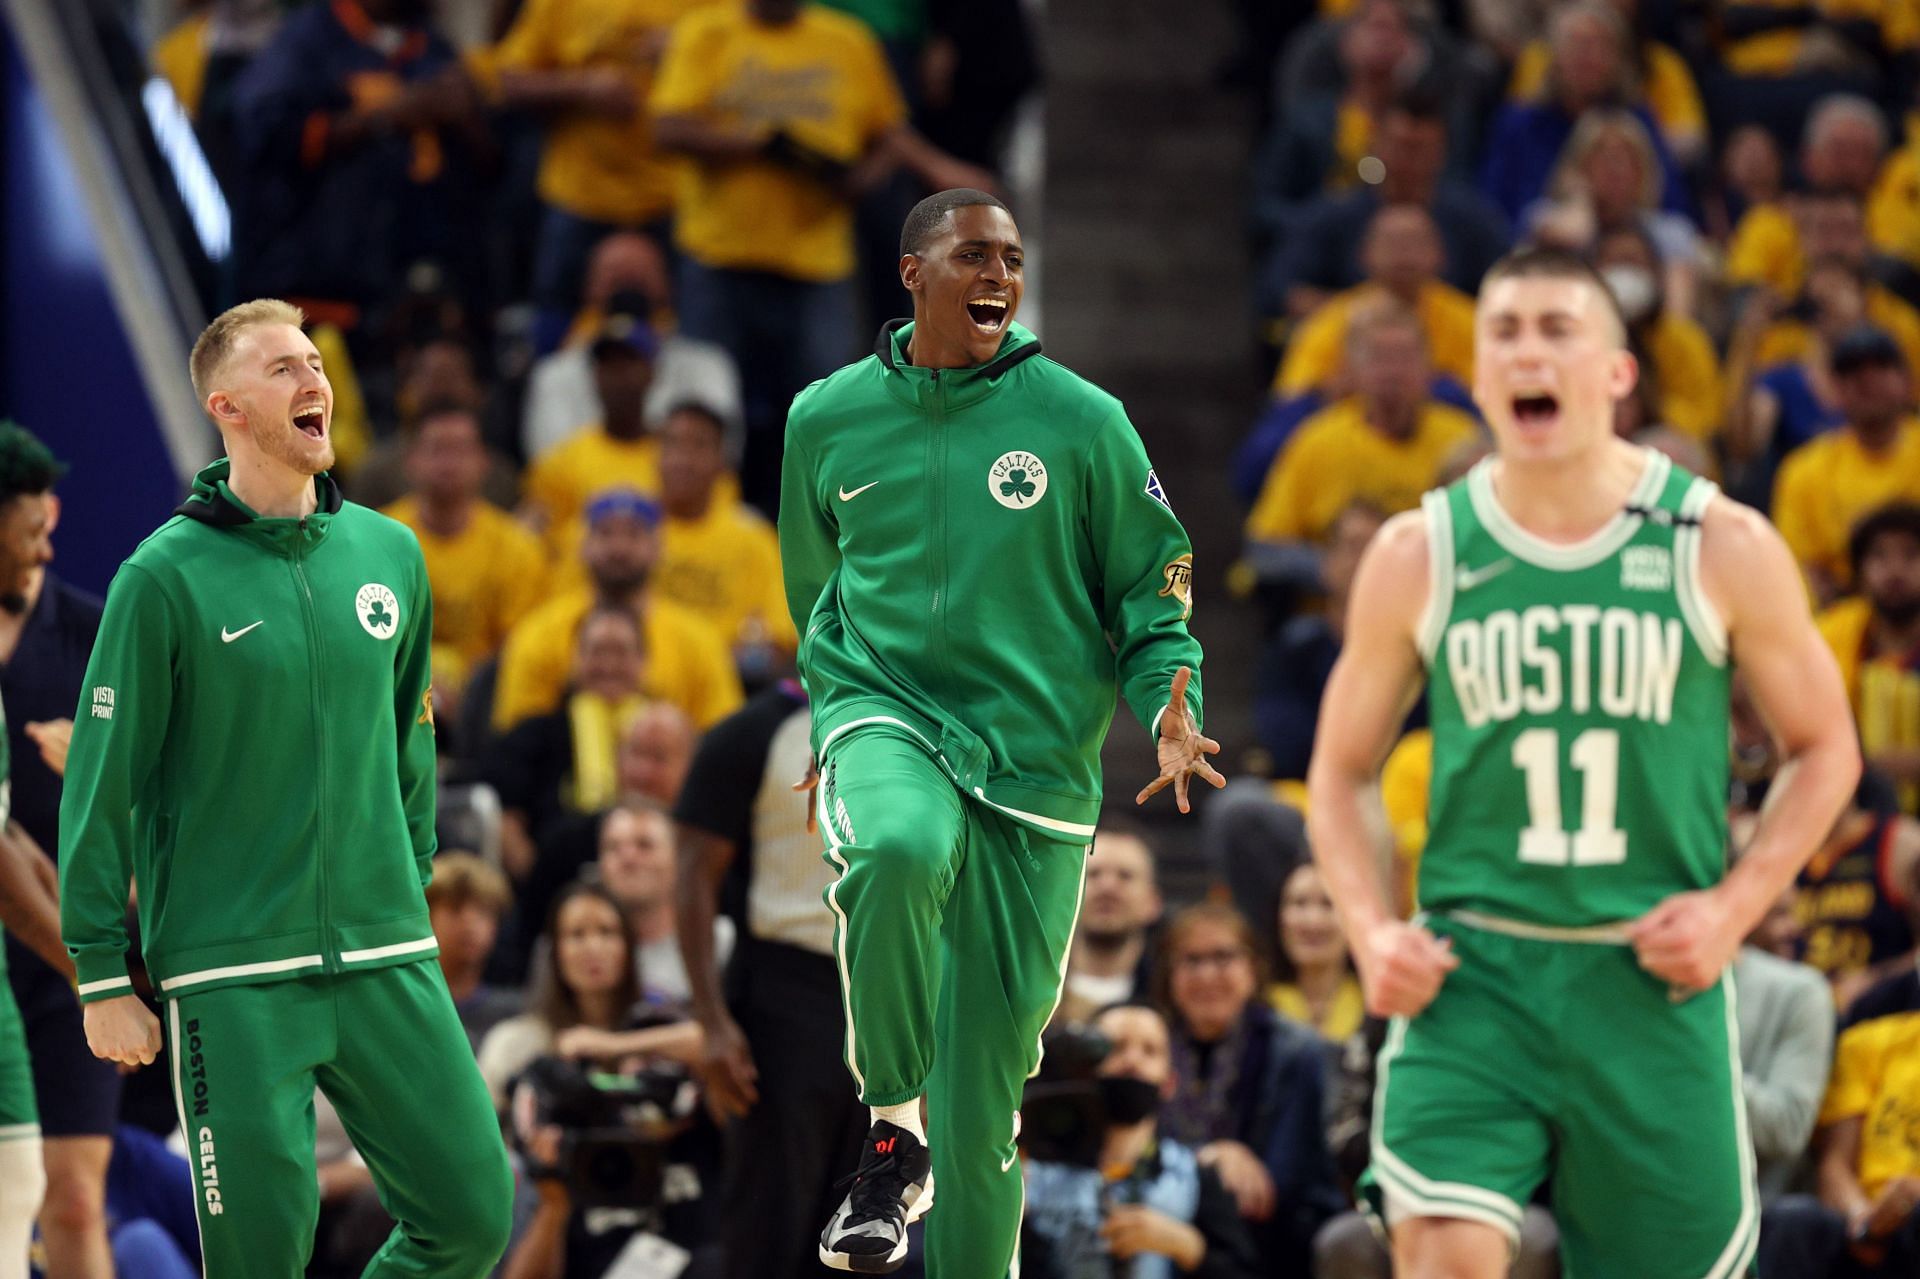 Malik Fitts of the Boston Celtics reacts with his teammates during Game 1 of the 2022 NBA Finals